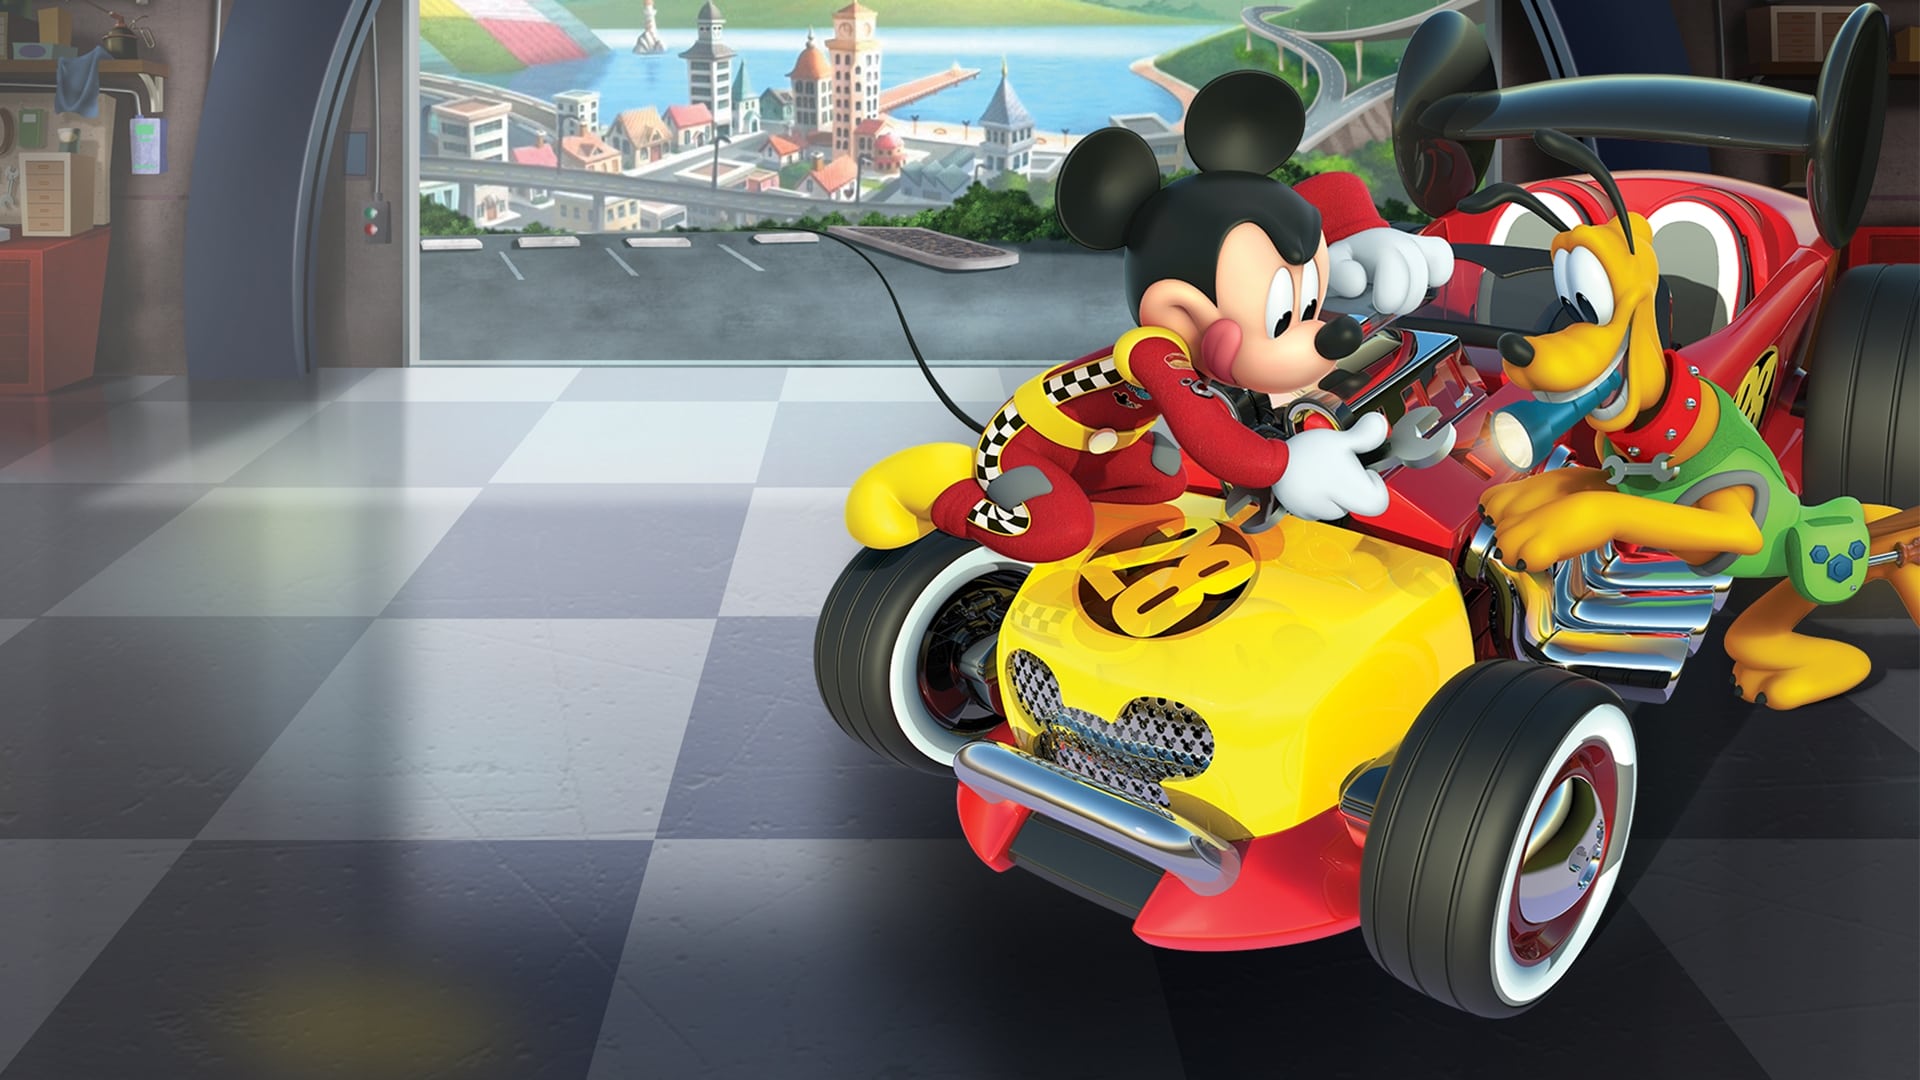 Mickey and the Roadster Racers (TV Series 2017- )